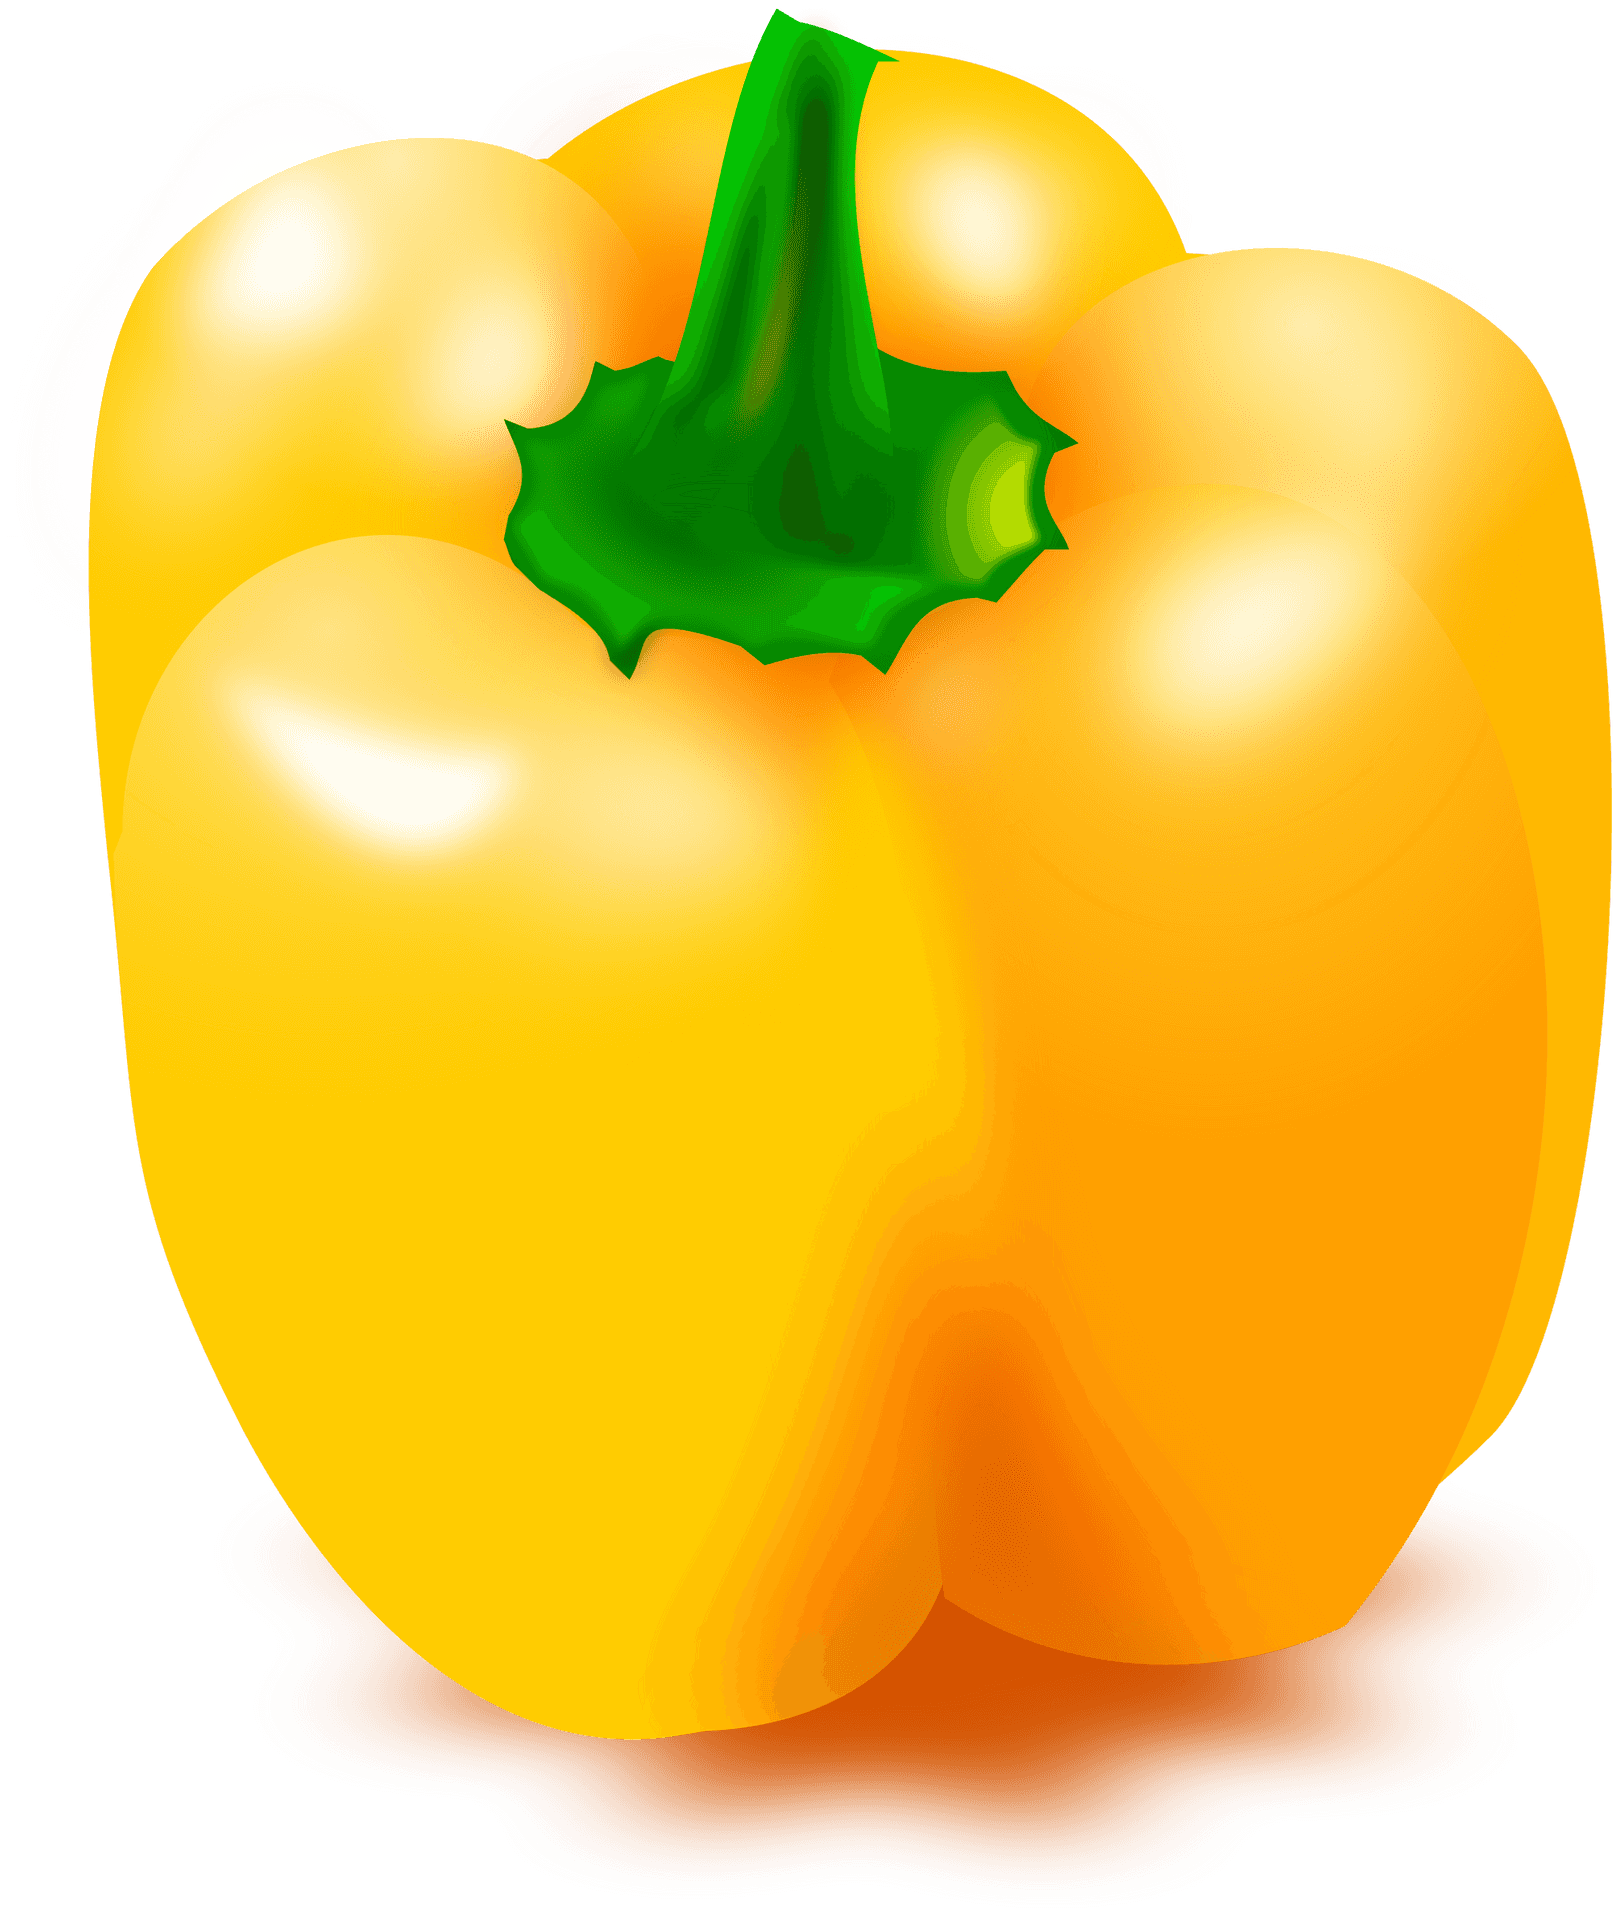 Vibrant Yellow Bell Pepper Illustration PNG image